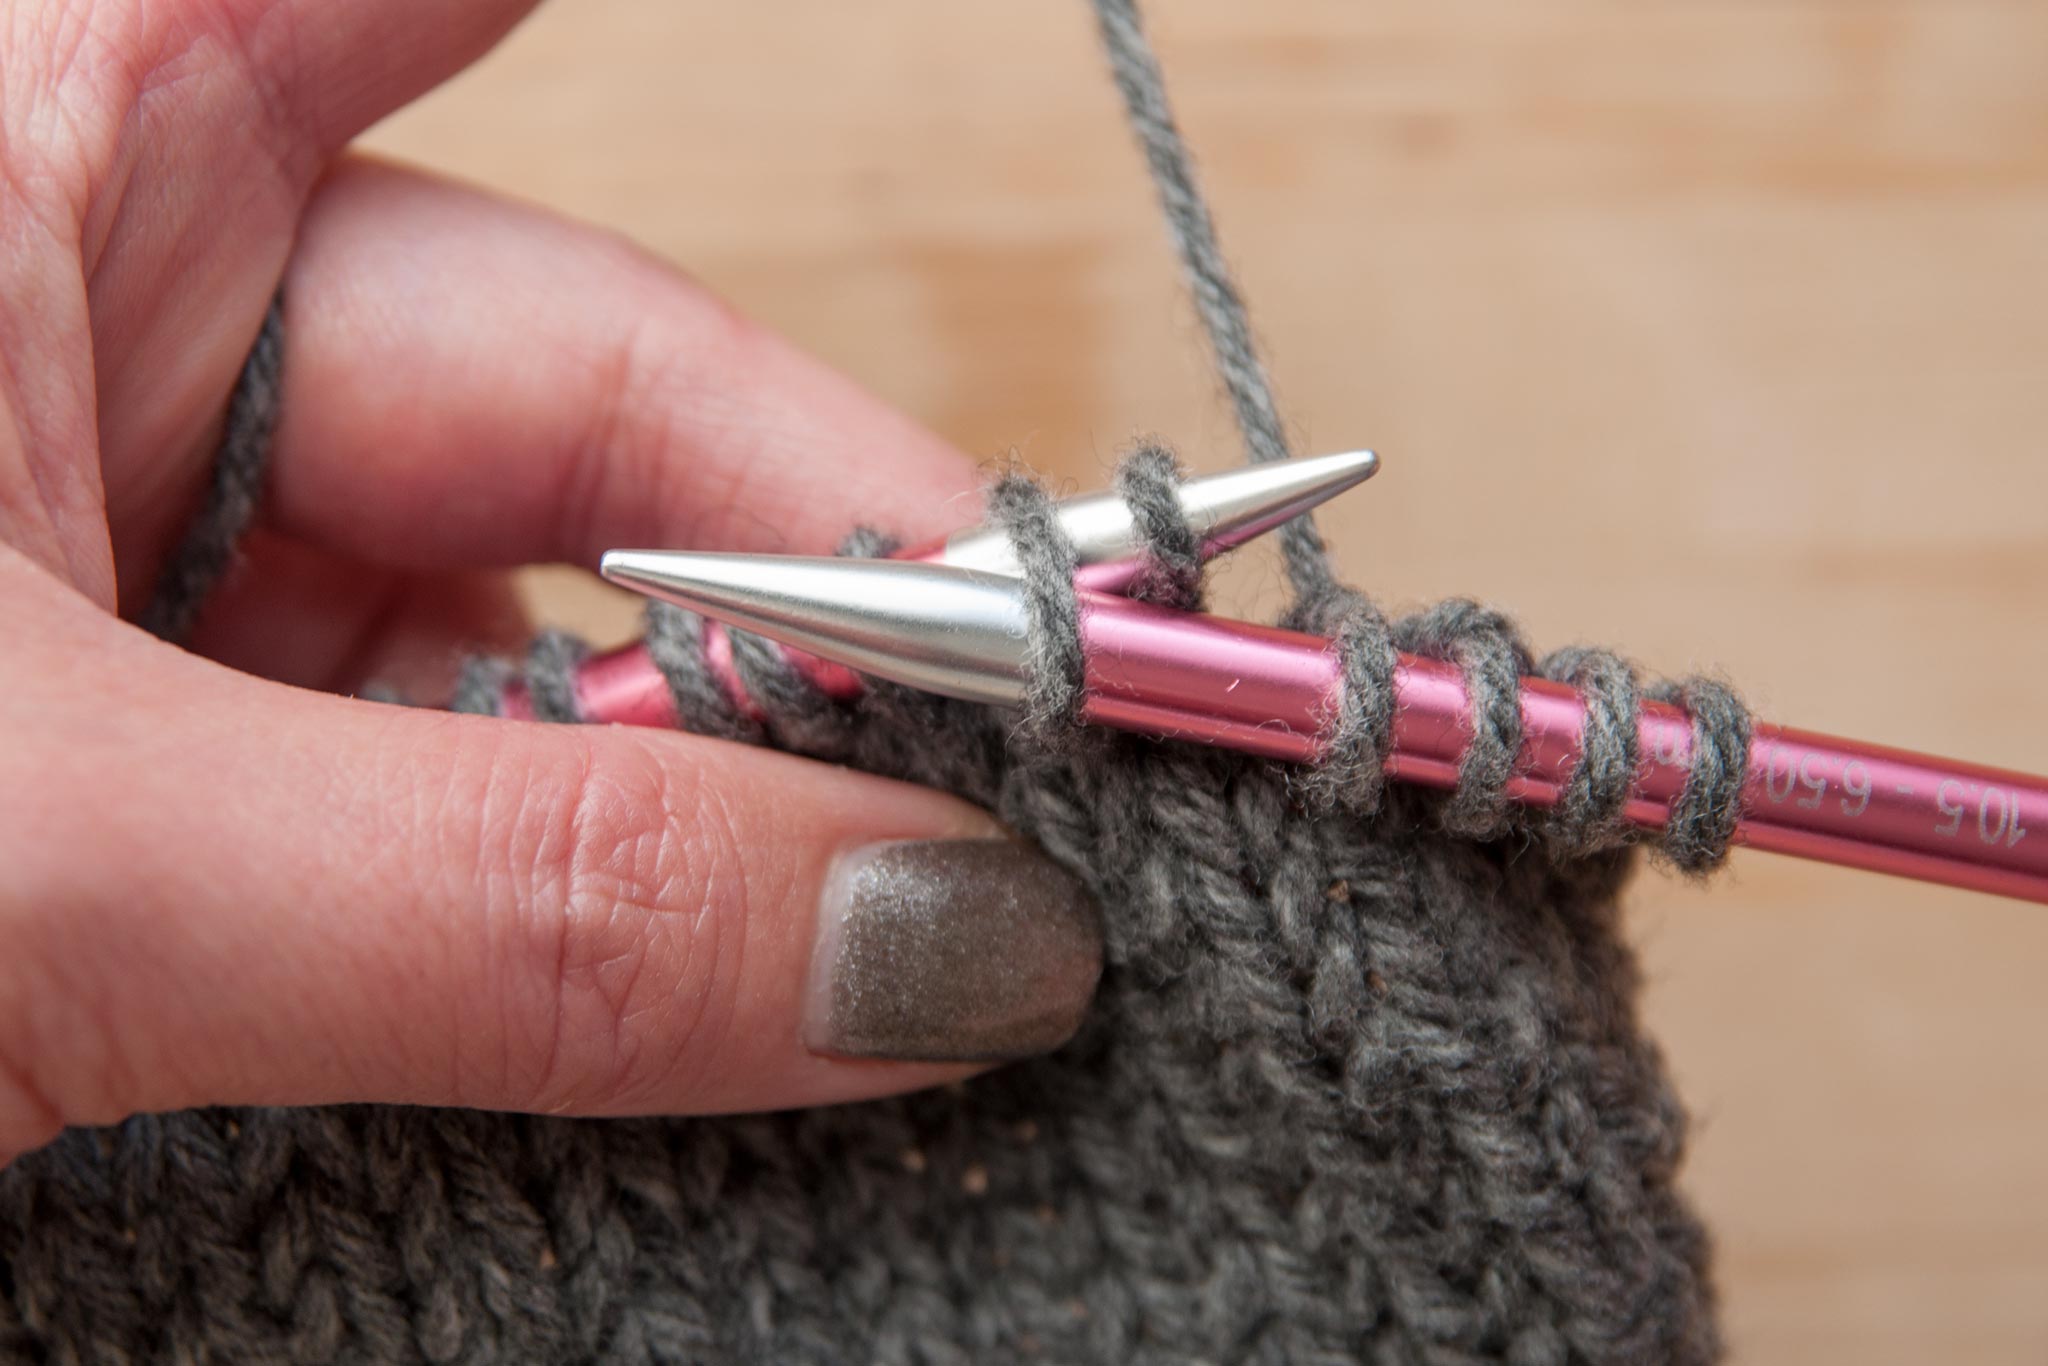 Insert the right needle tip into the front of the 2nd stitch on the left needle.